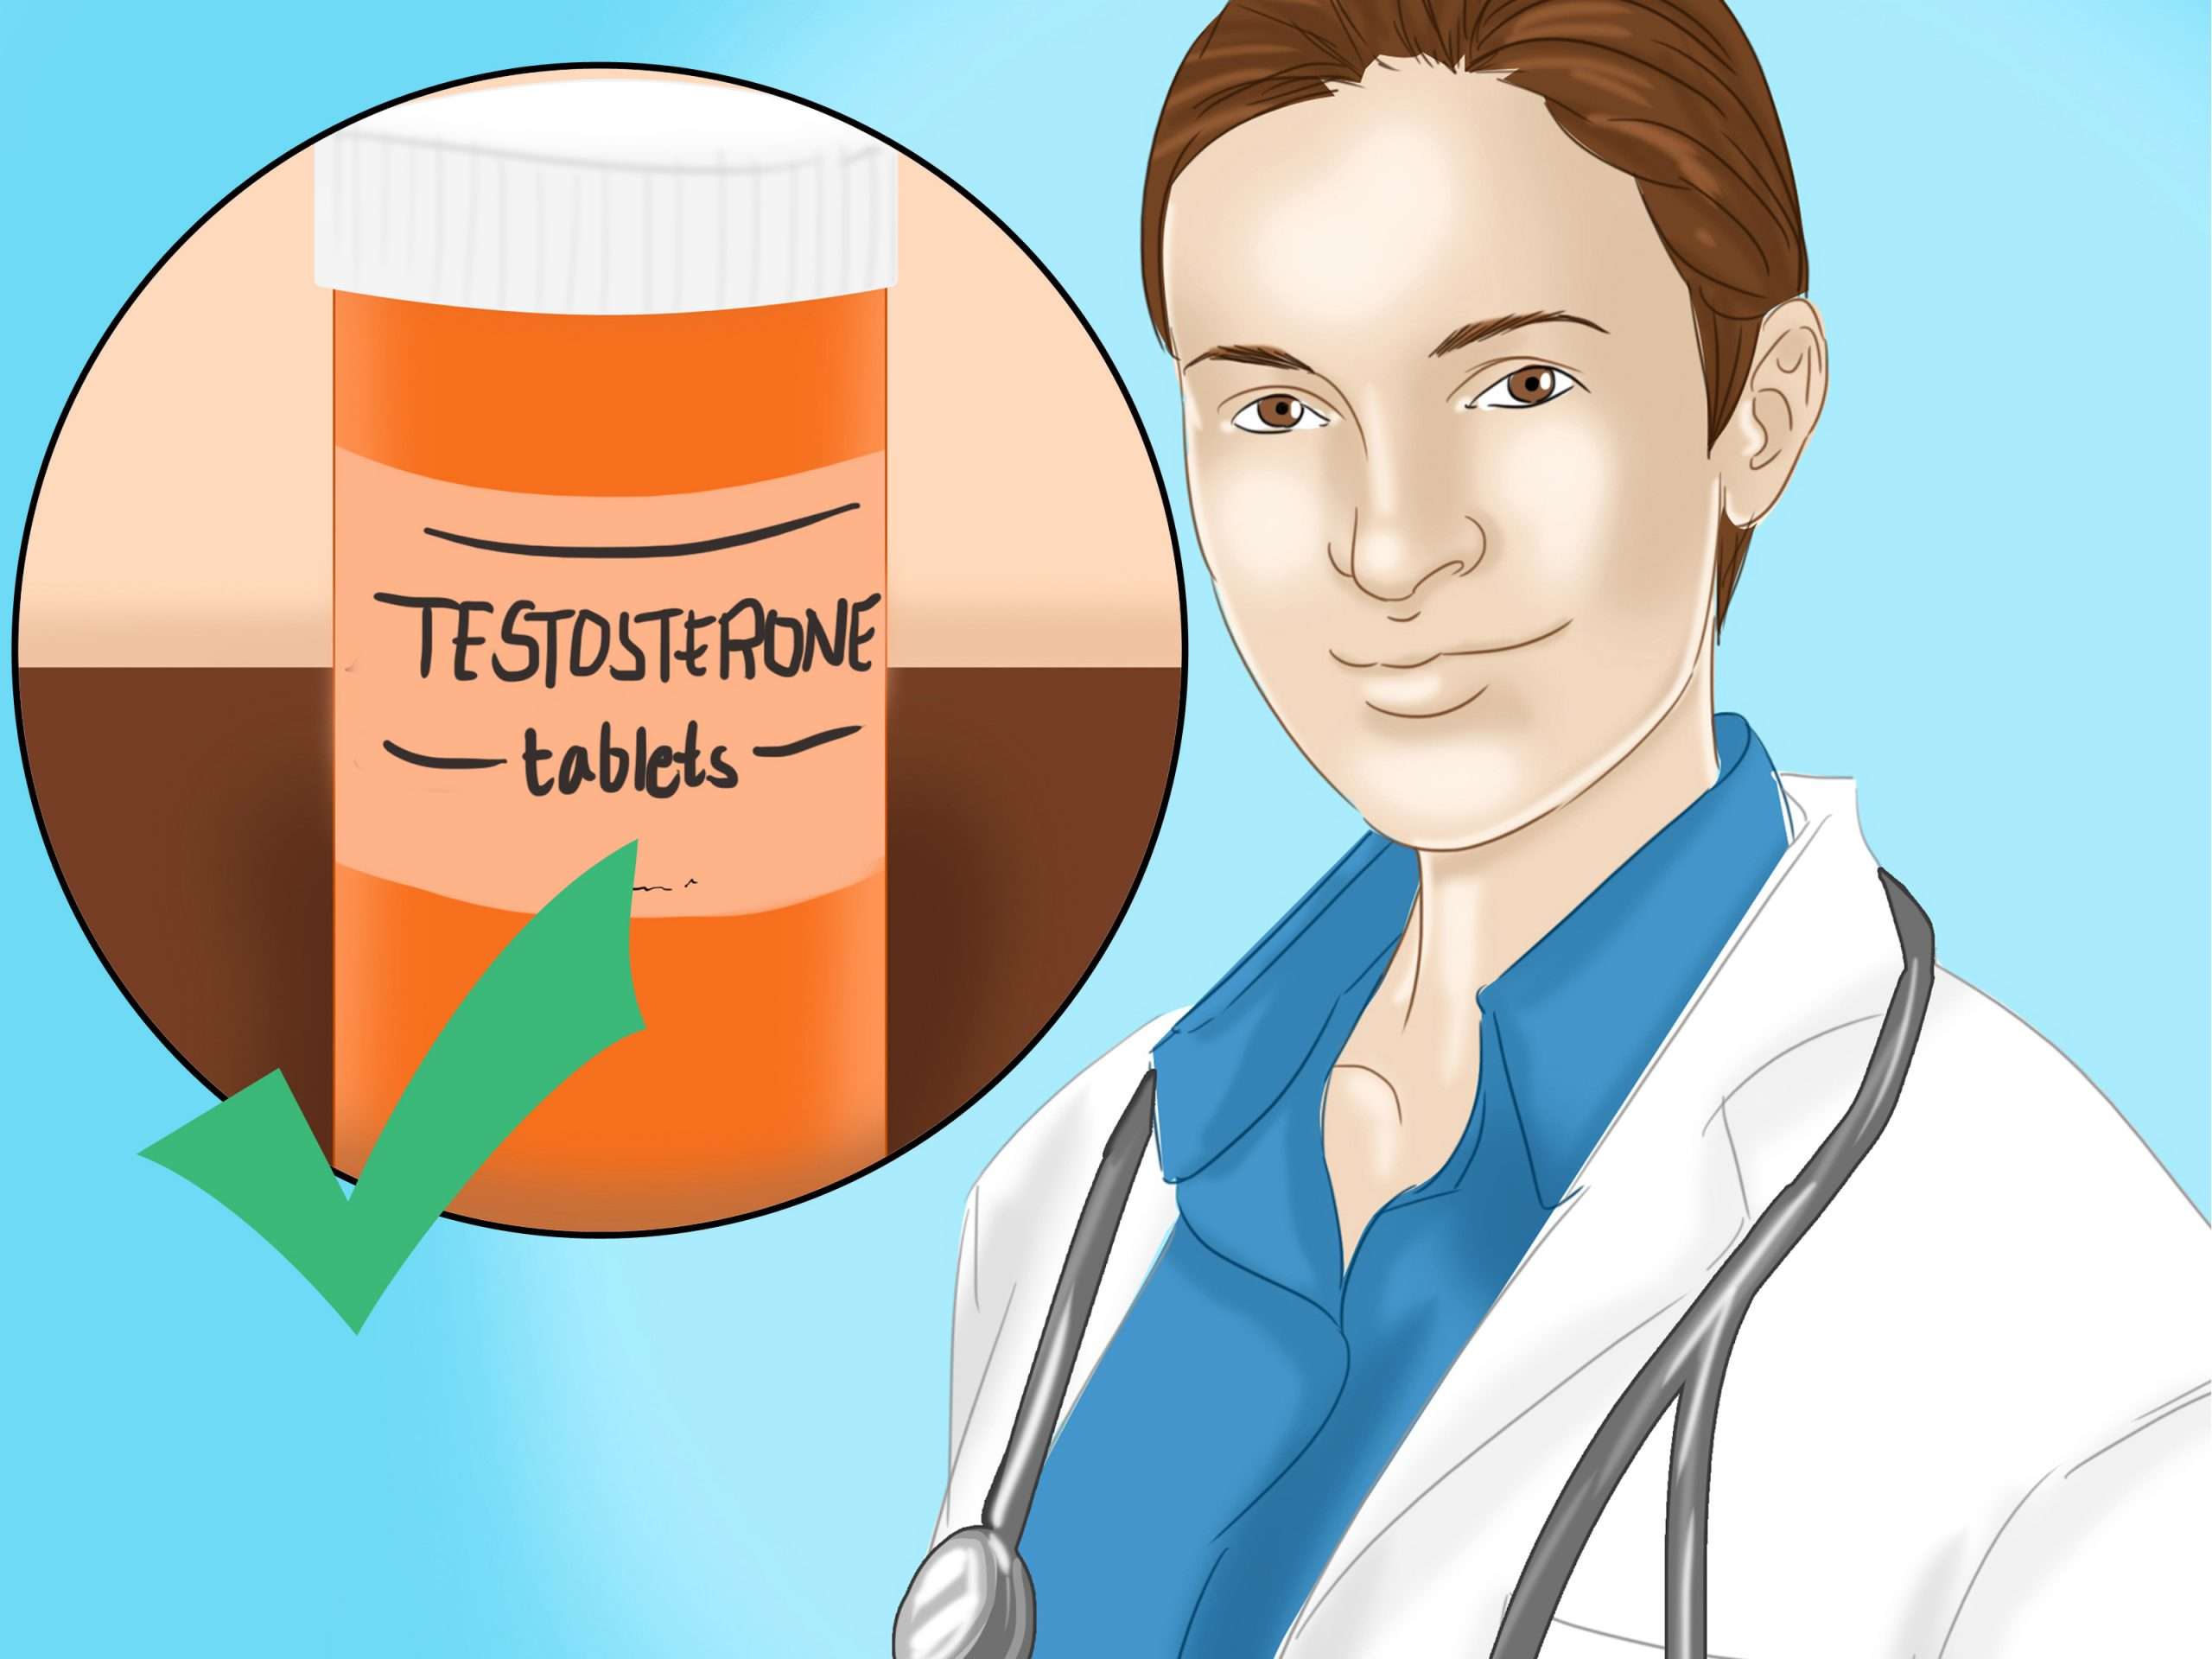 How to Undergo Testosterone Therapy: 14 Steps (with Pictures)